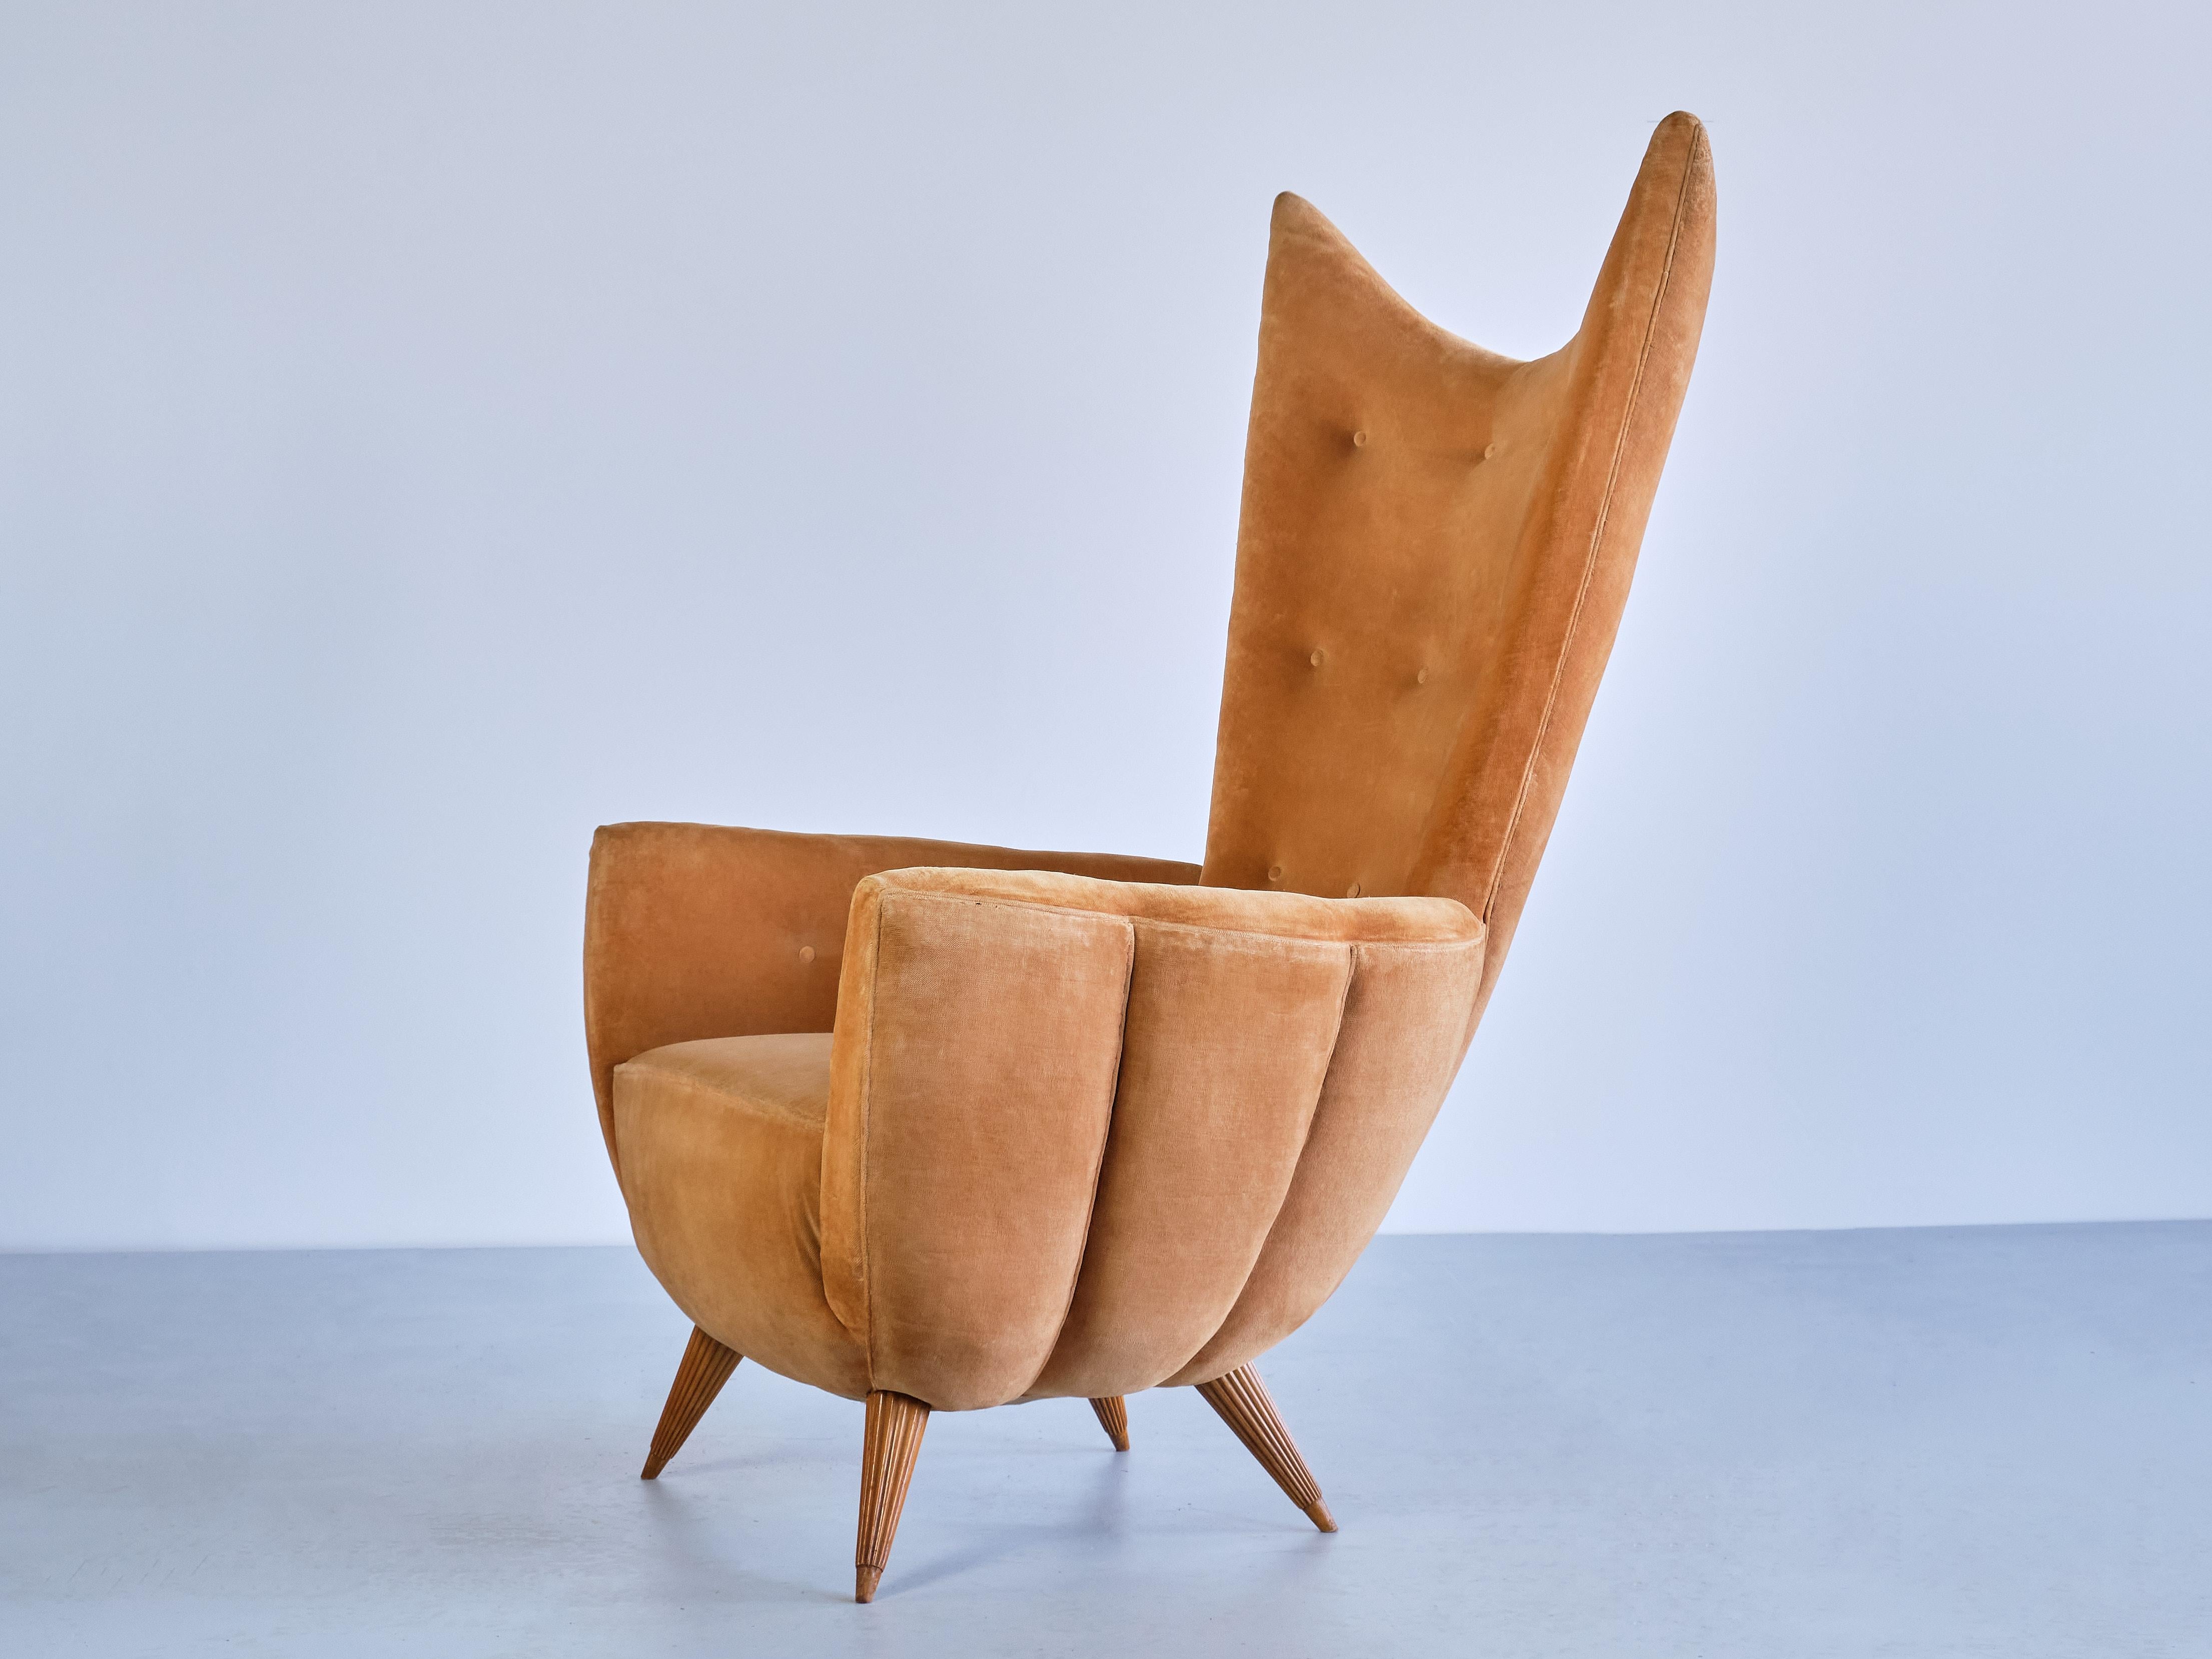 Exceptional Guglielmo Ulrich Armchair in Velvet and Fluted Walnut, Italy, 1940s For Sale 10